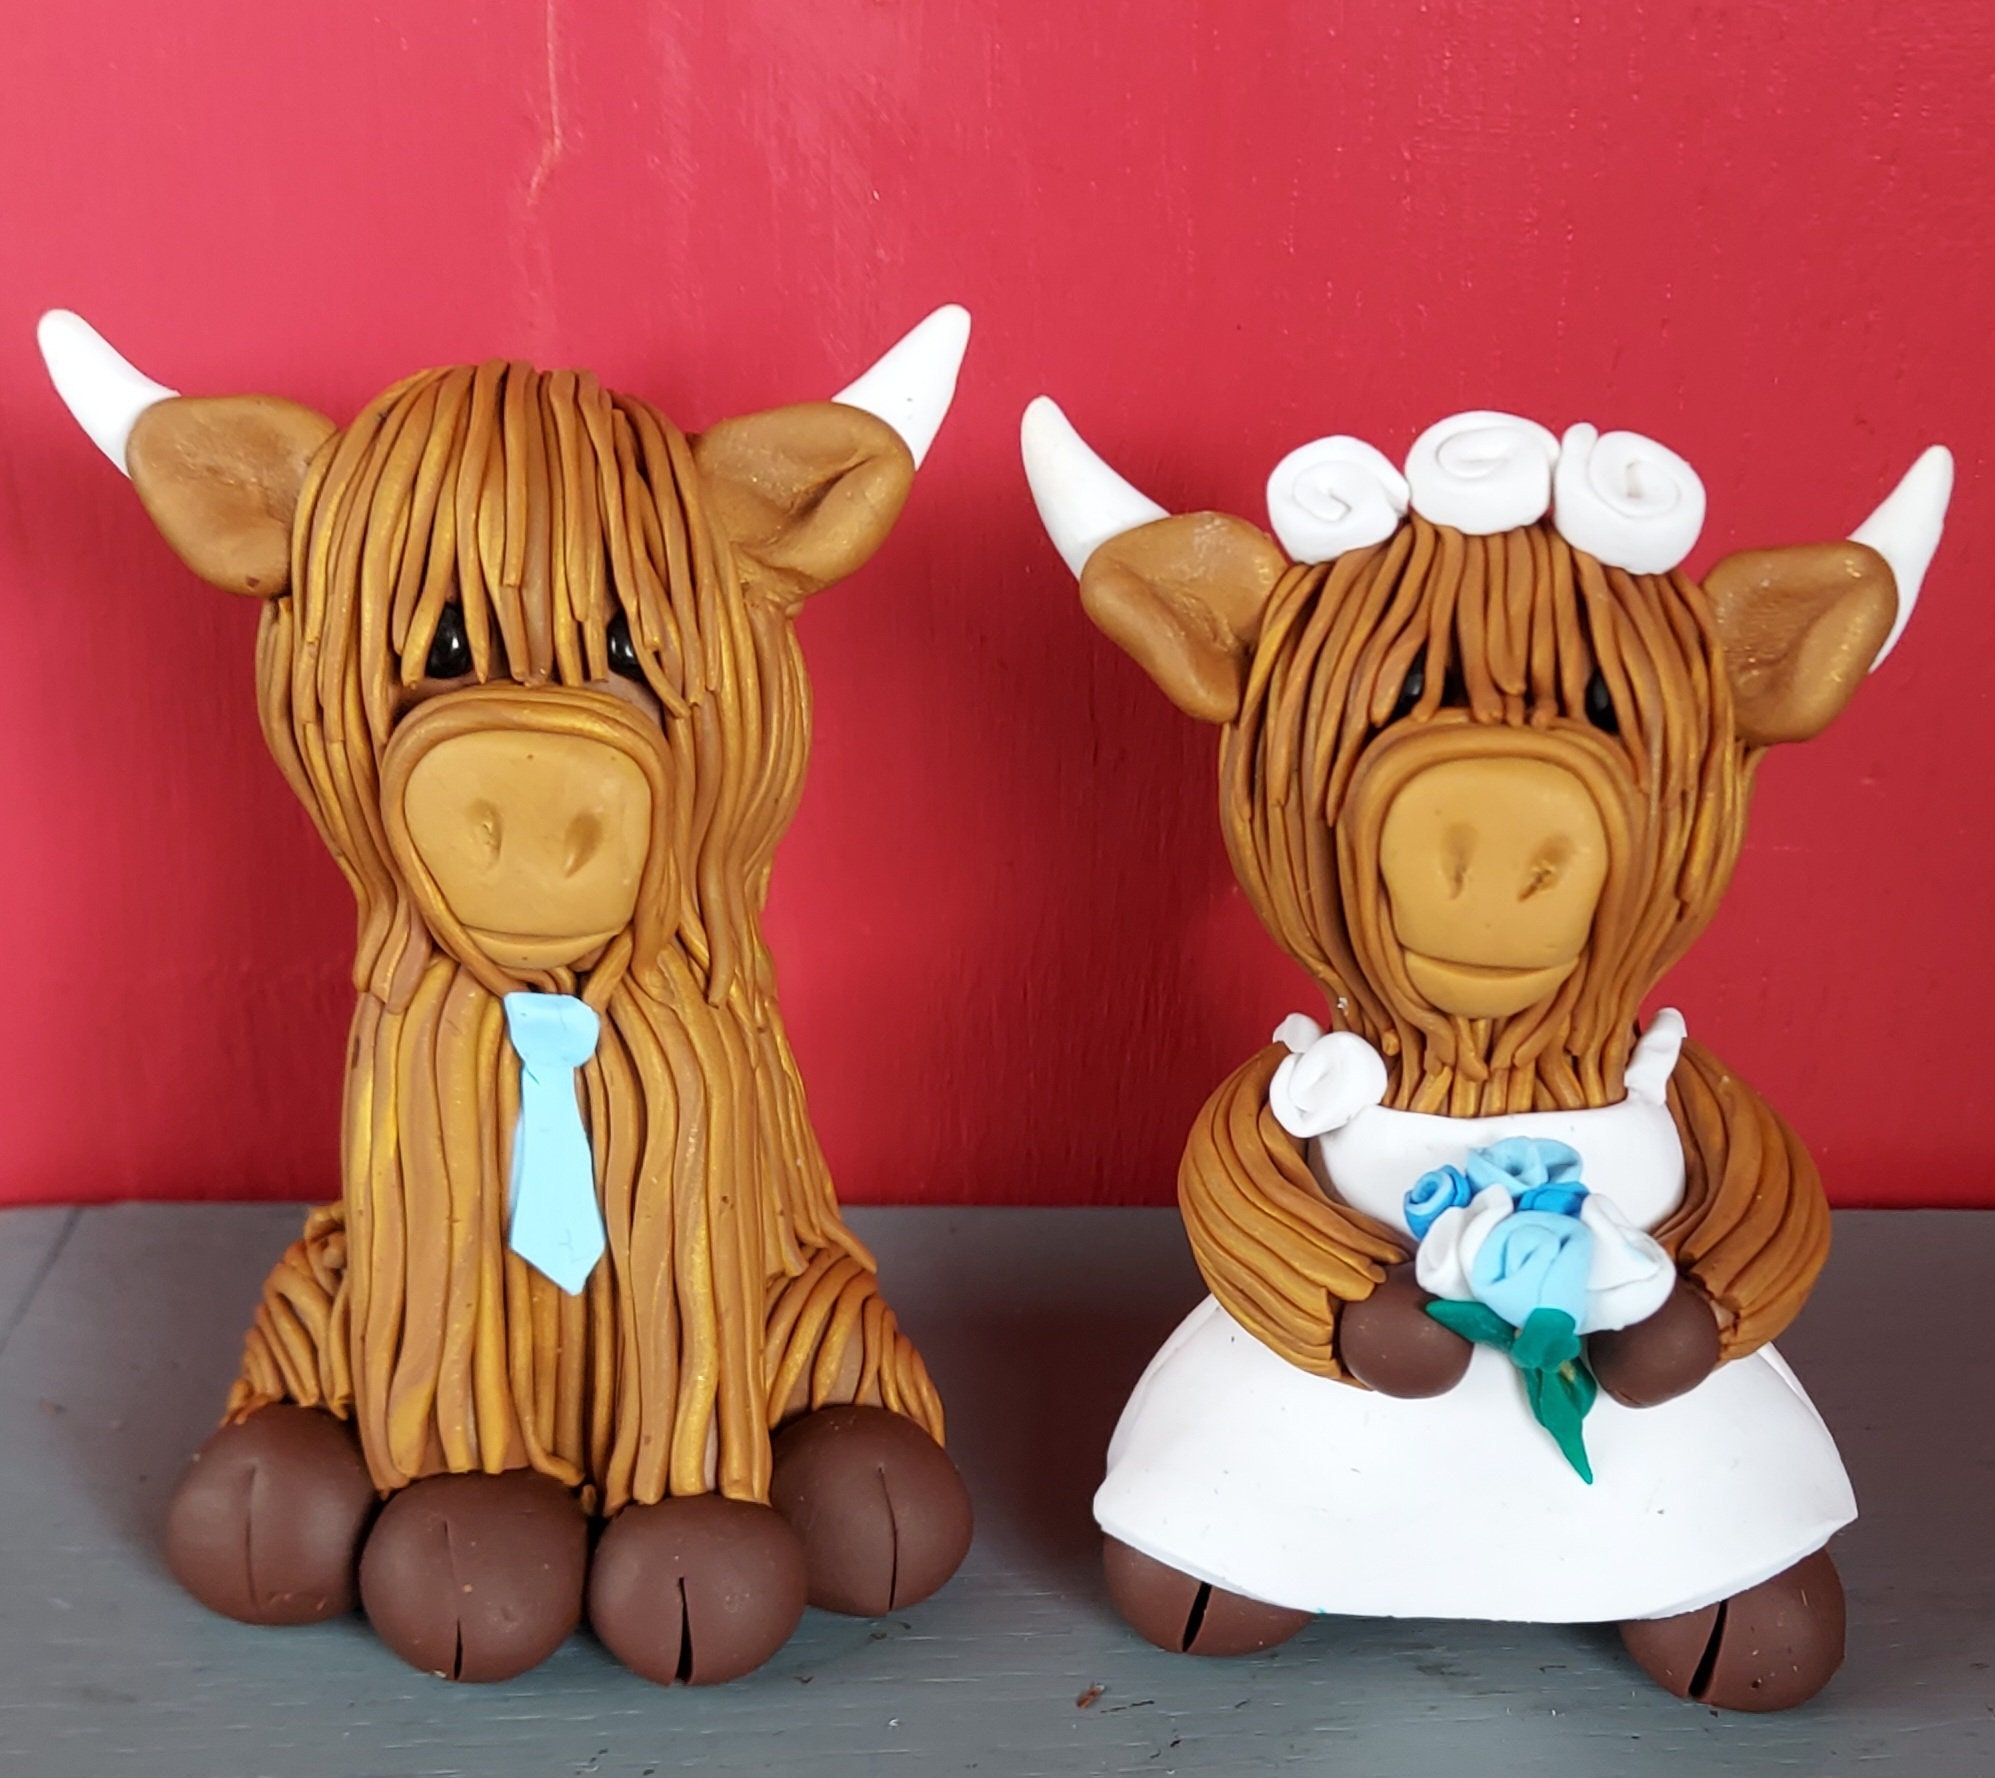 Cow Cake Topper by Jarreth on DeviantArt